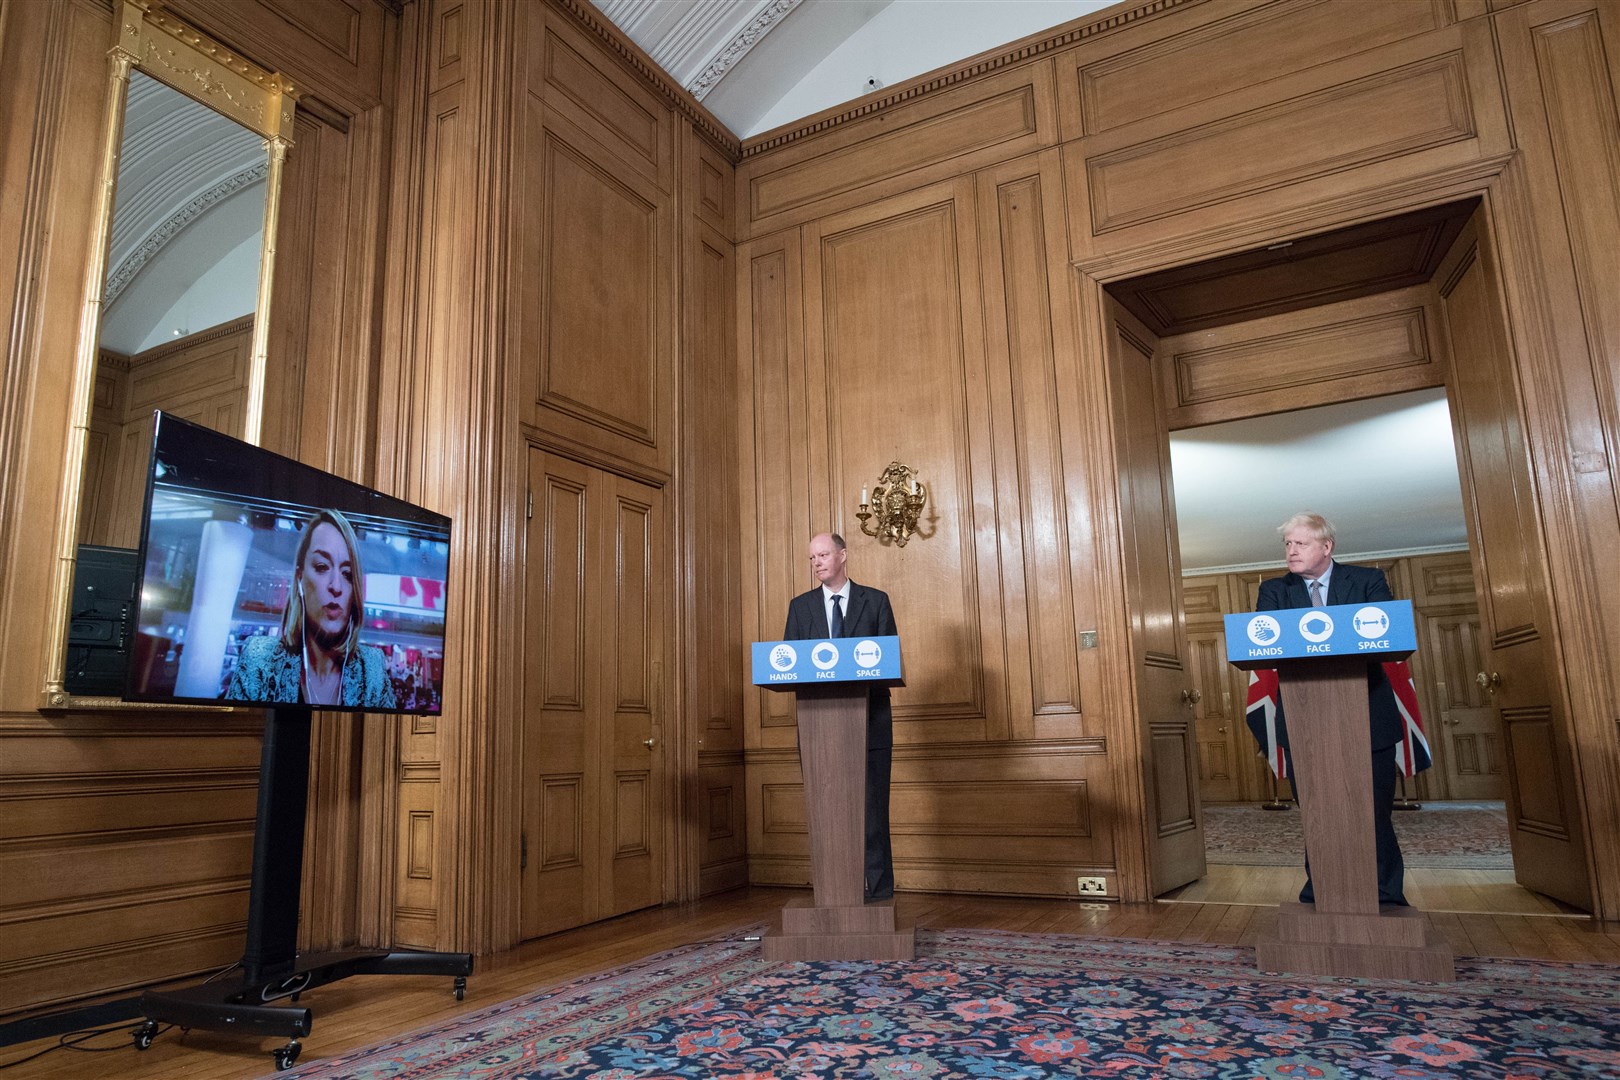 Chief medical officer Professor Chris Witty (left) and Prime Minister Boris Johnson during a virtual press conference at Downing Street, London (Stefan Rousseau/PA)